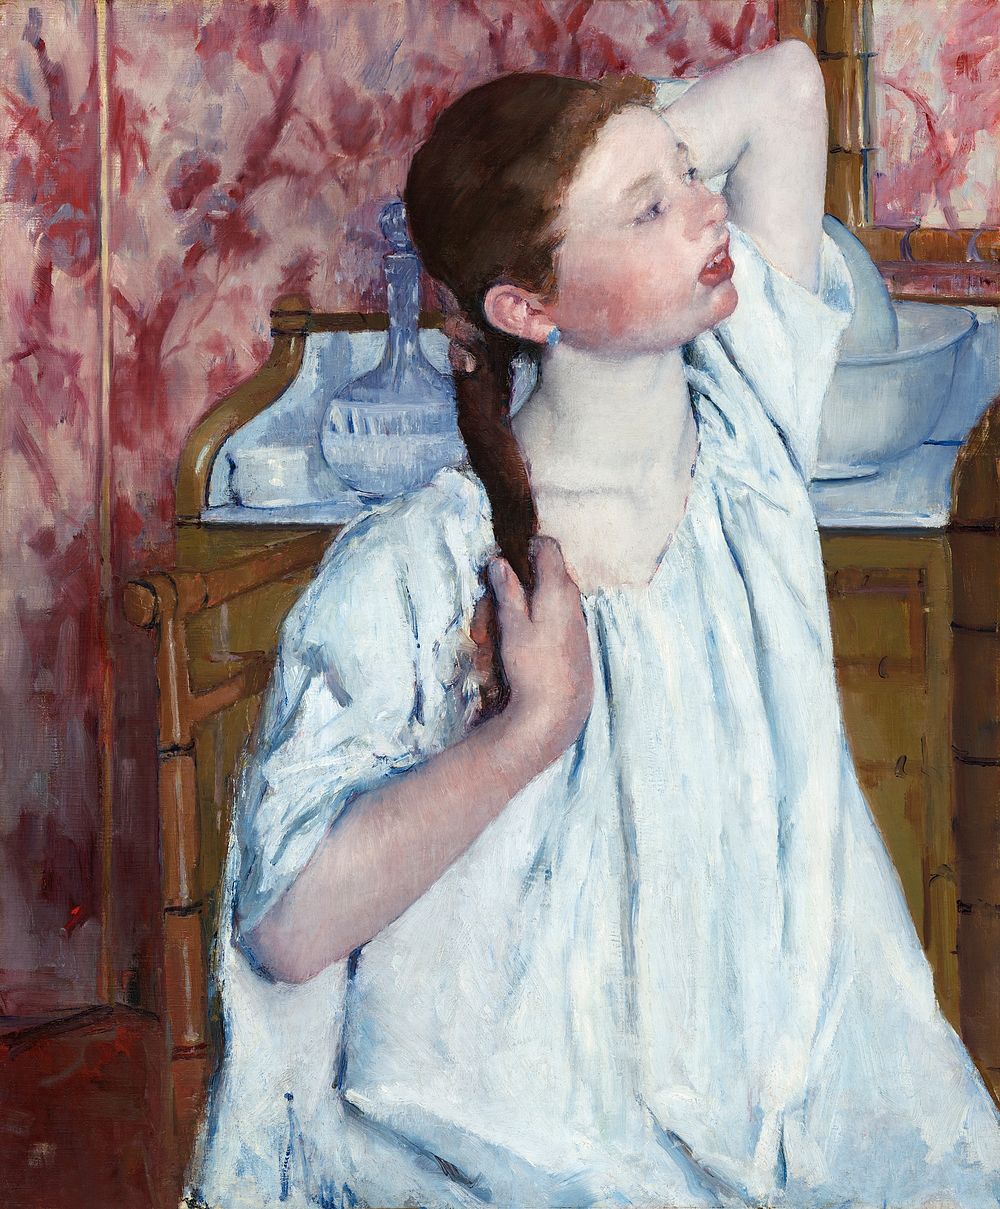 Girl Arranging Her Hair (1886) by Mary Cassatt. Original portrait painting from The National Gallery of Art. Digitally…